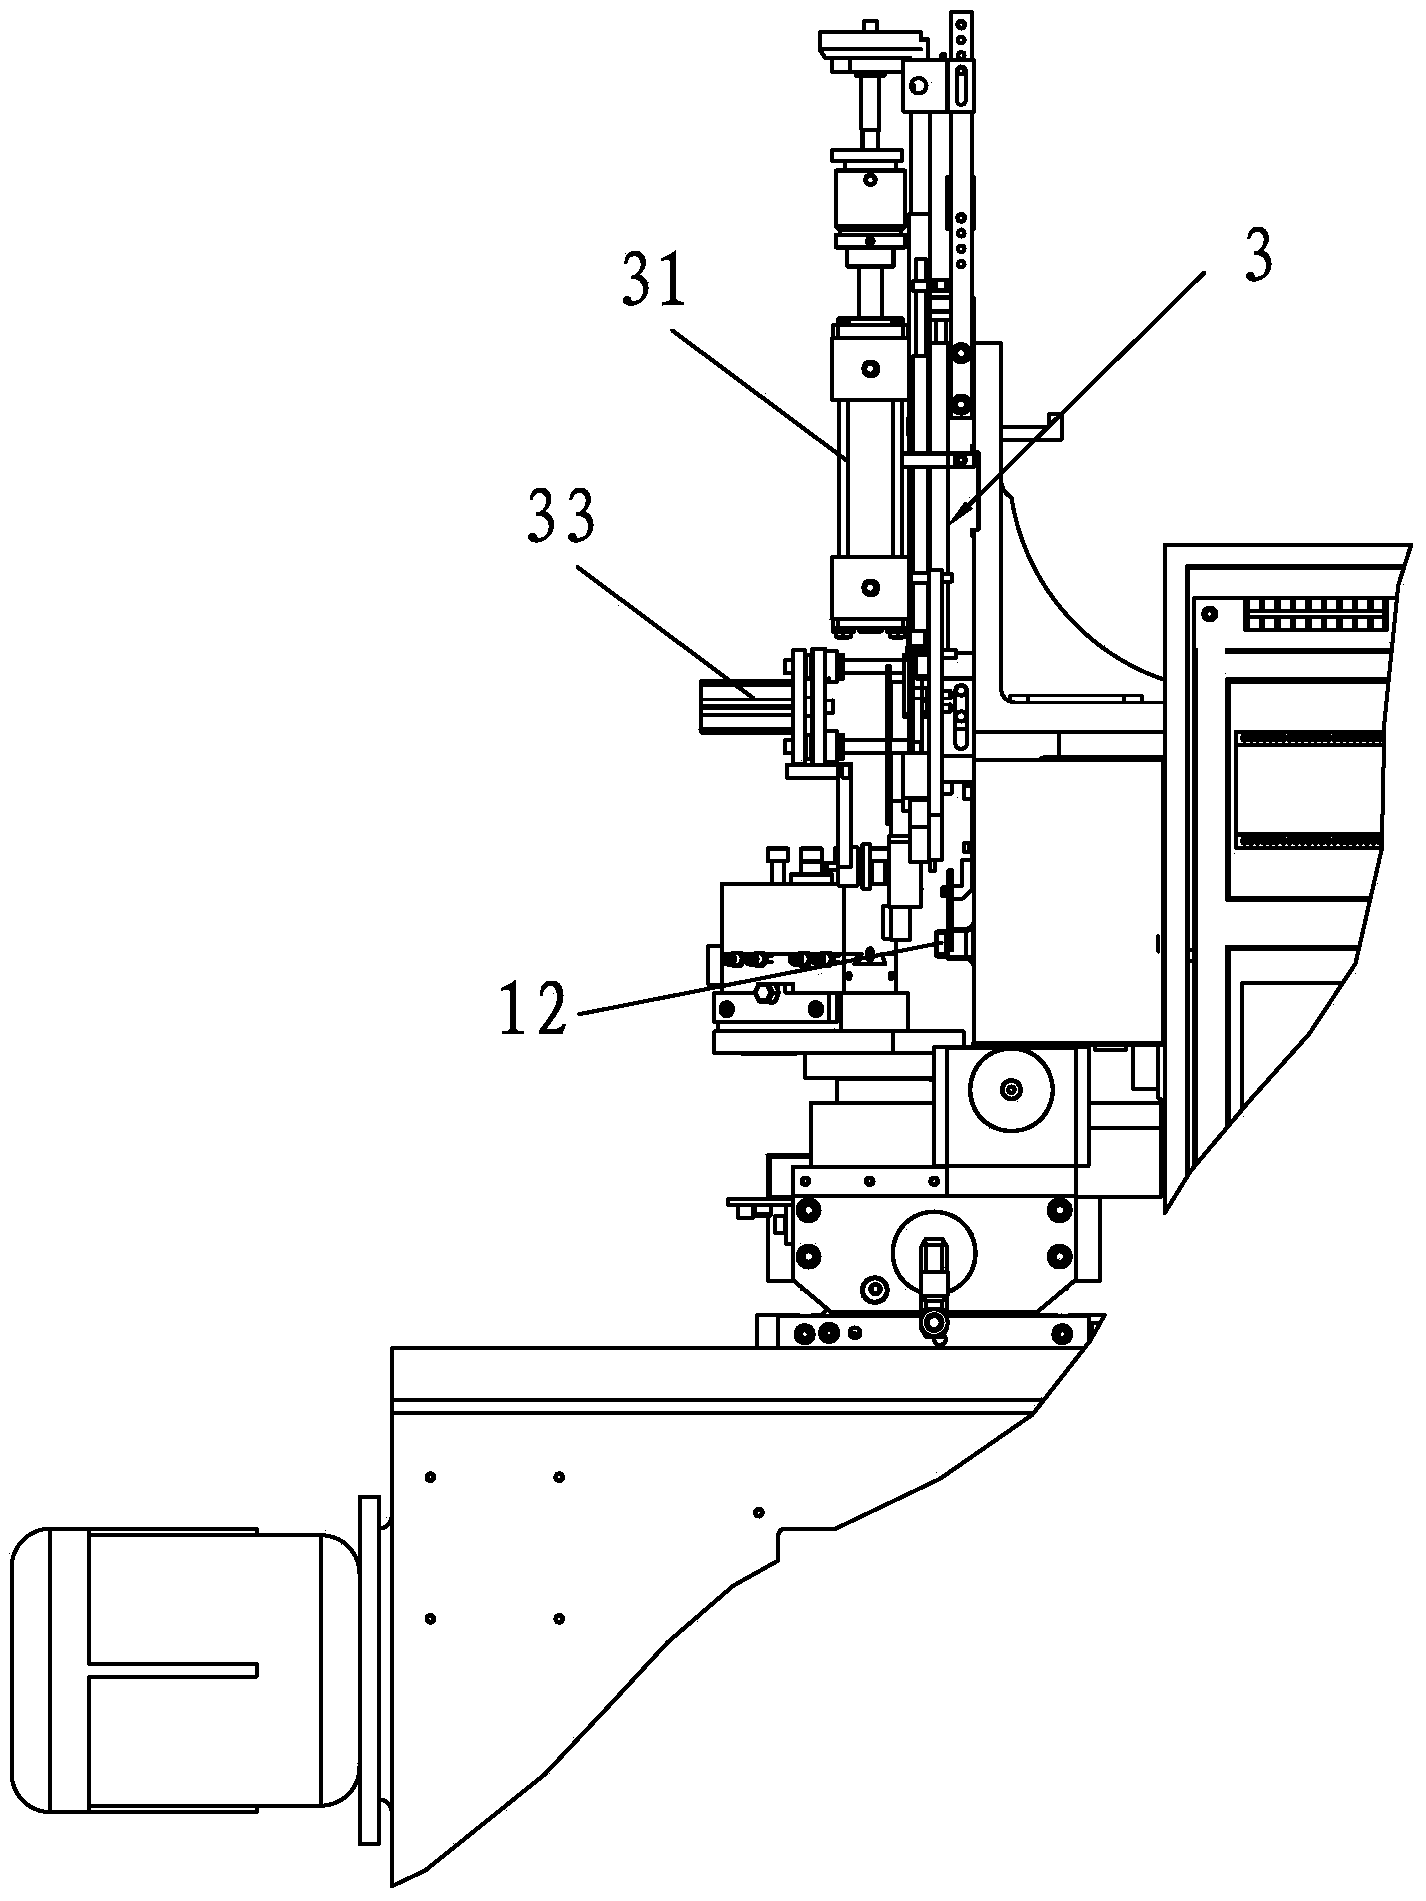 A spherical automatic machine tool